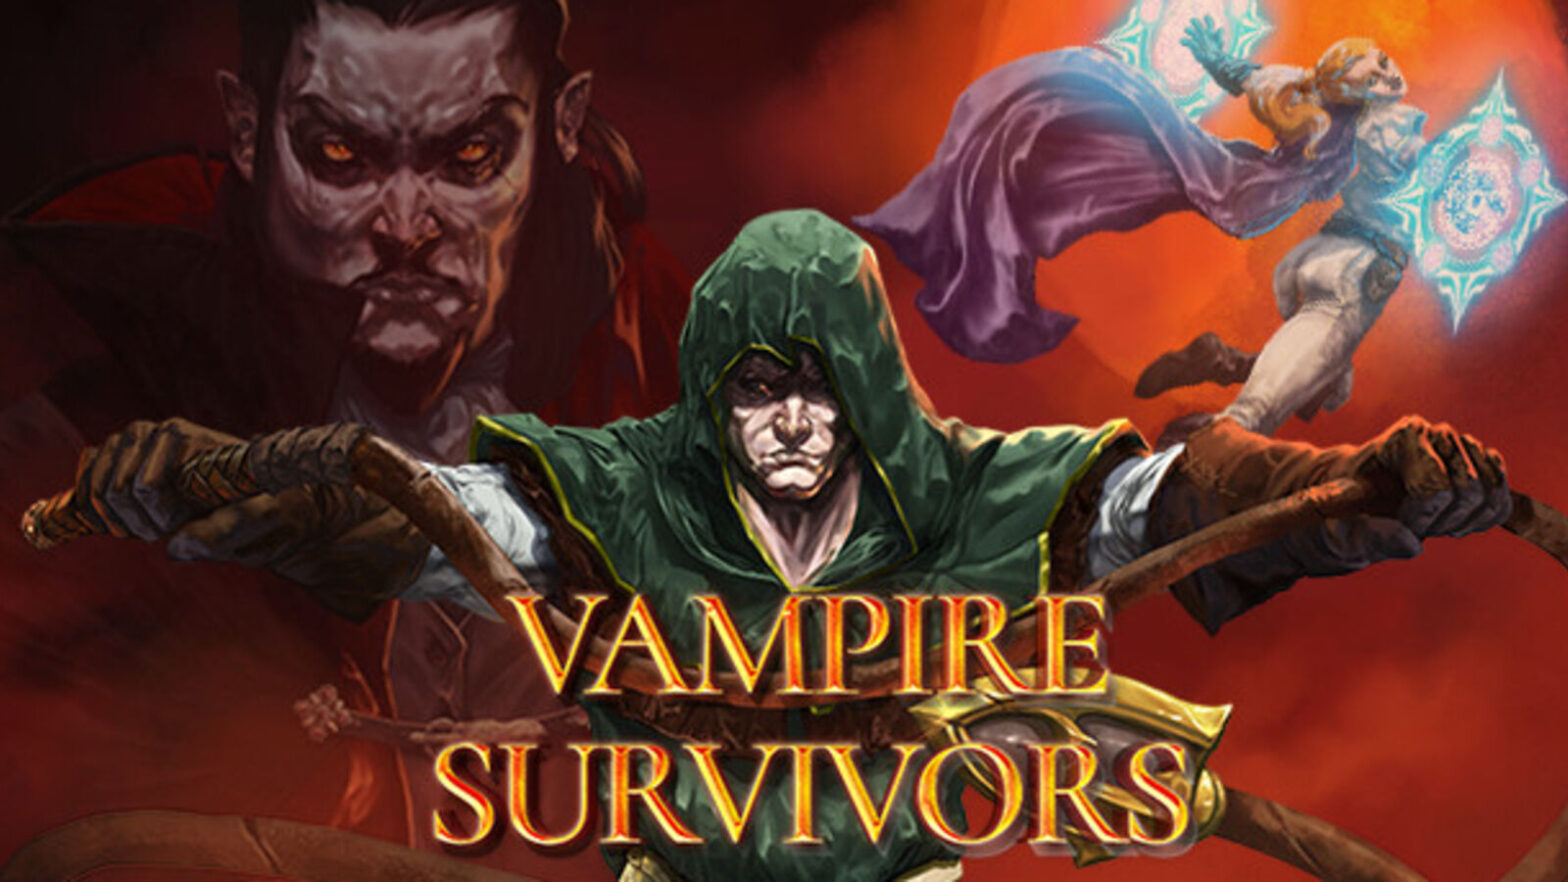 Vampire Survivors has been downloaded a million times in just one week